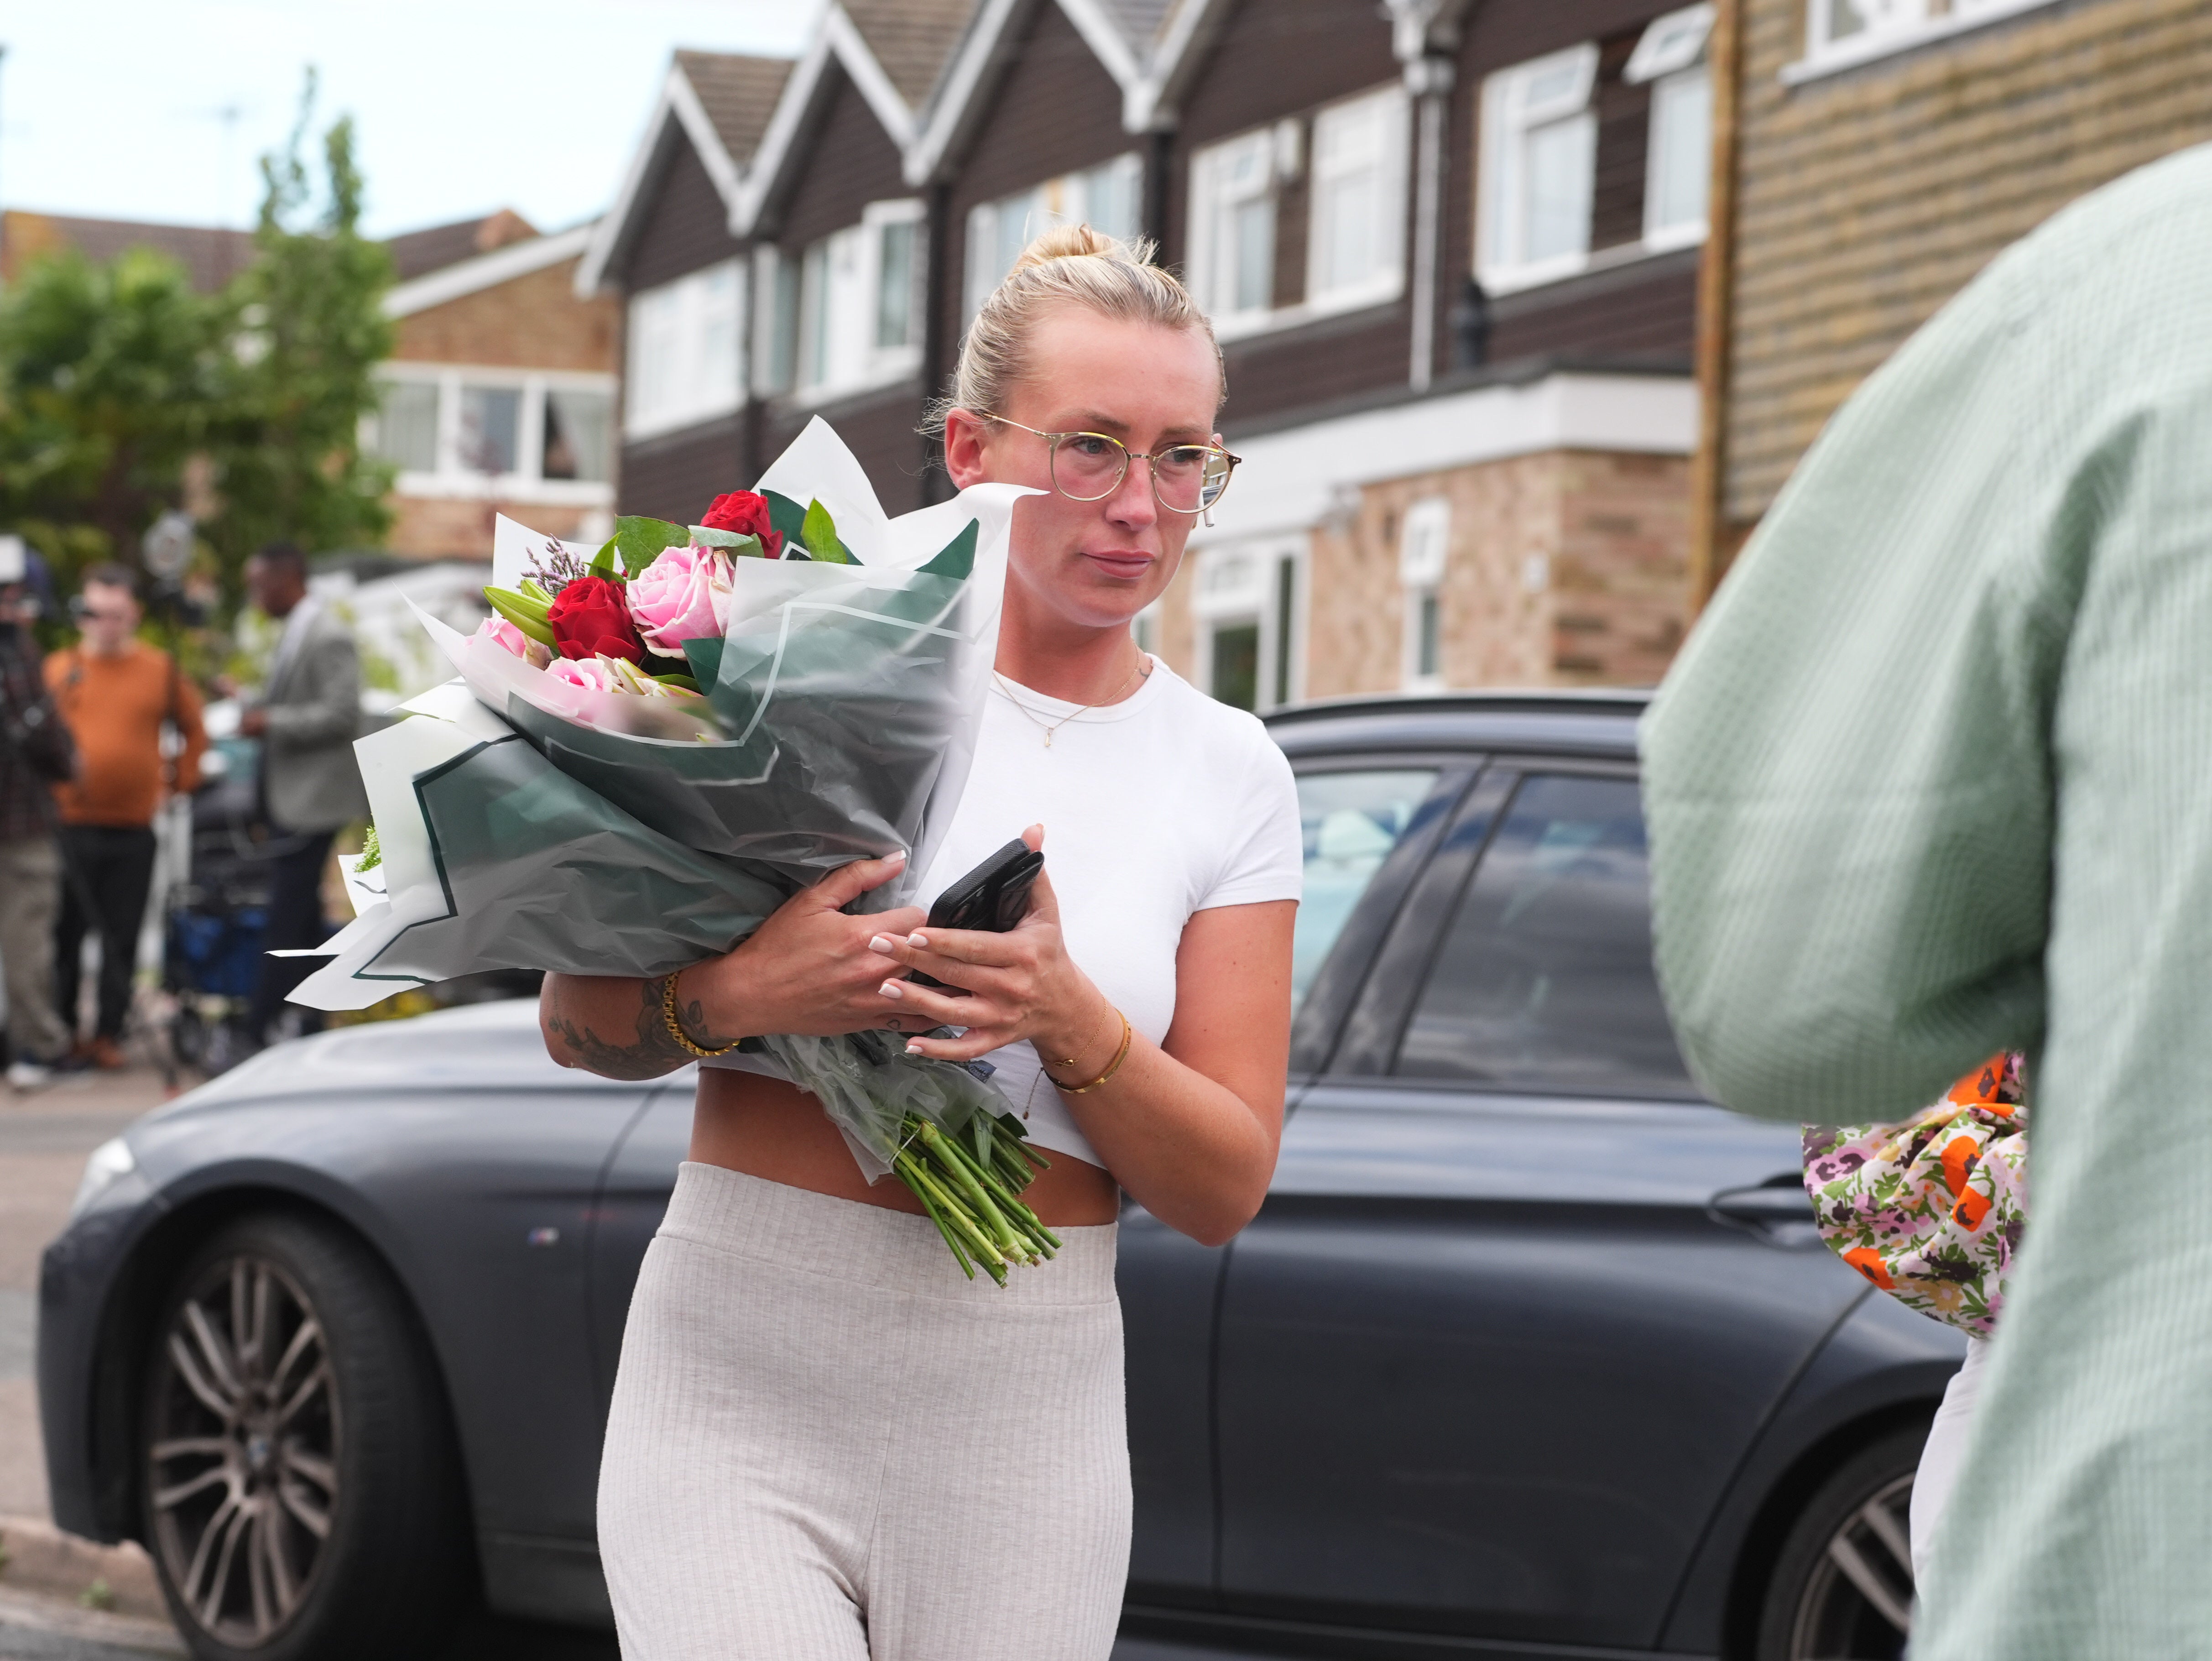 A woman leaves floral tributes at the scene